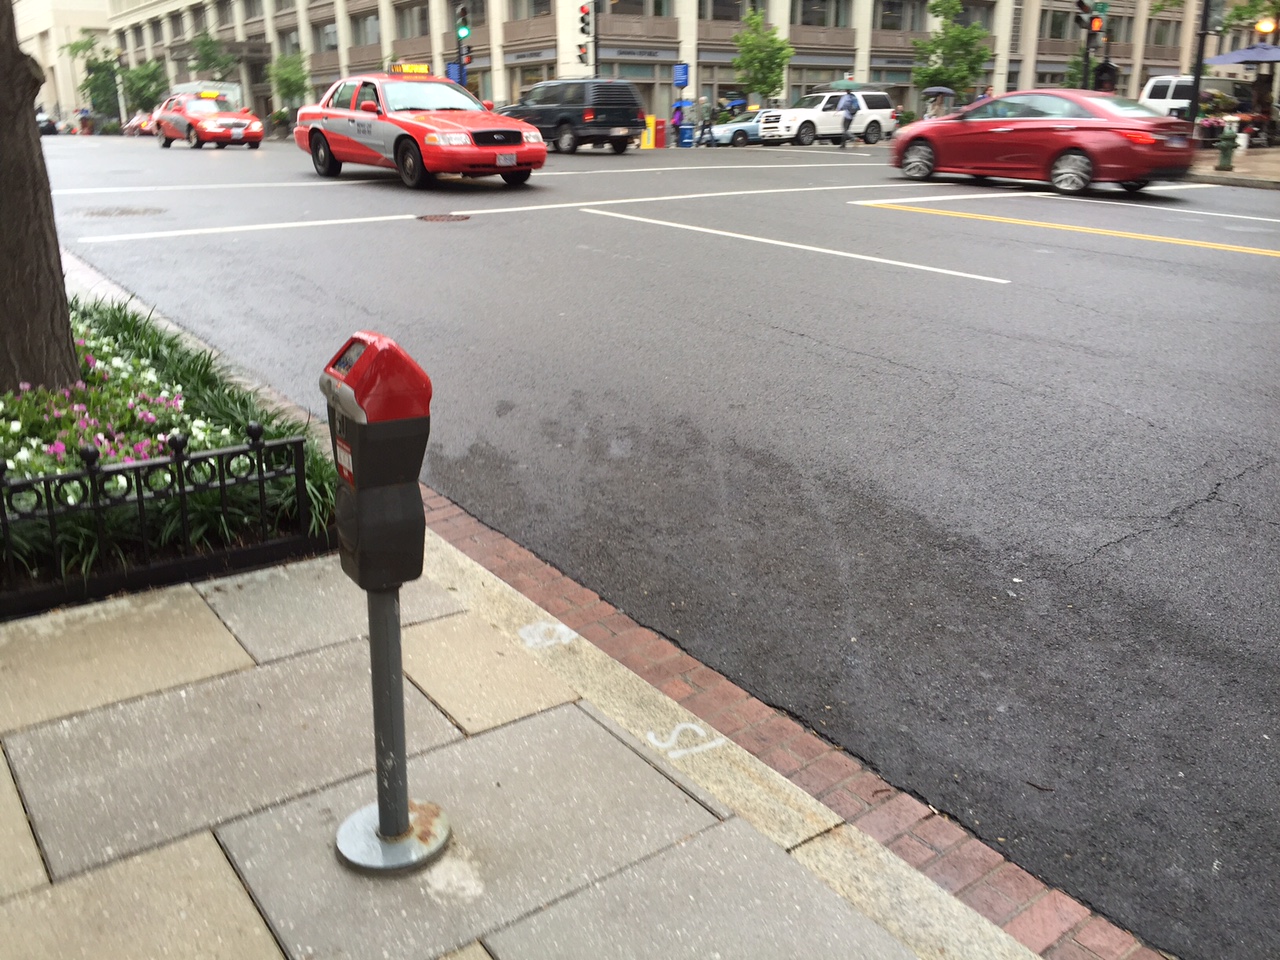 Handicapped parking may not be free in D.C. too much longer